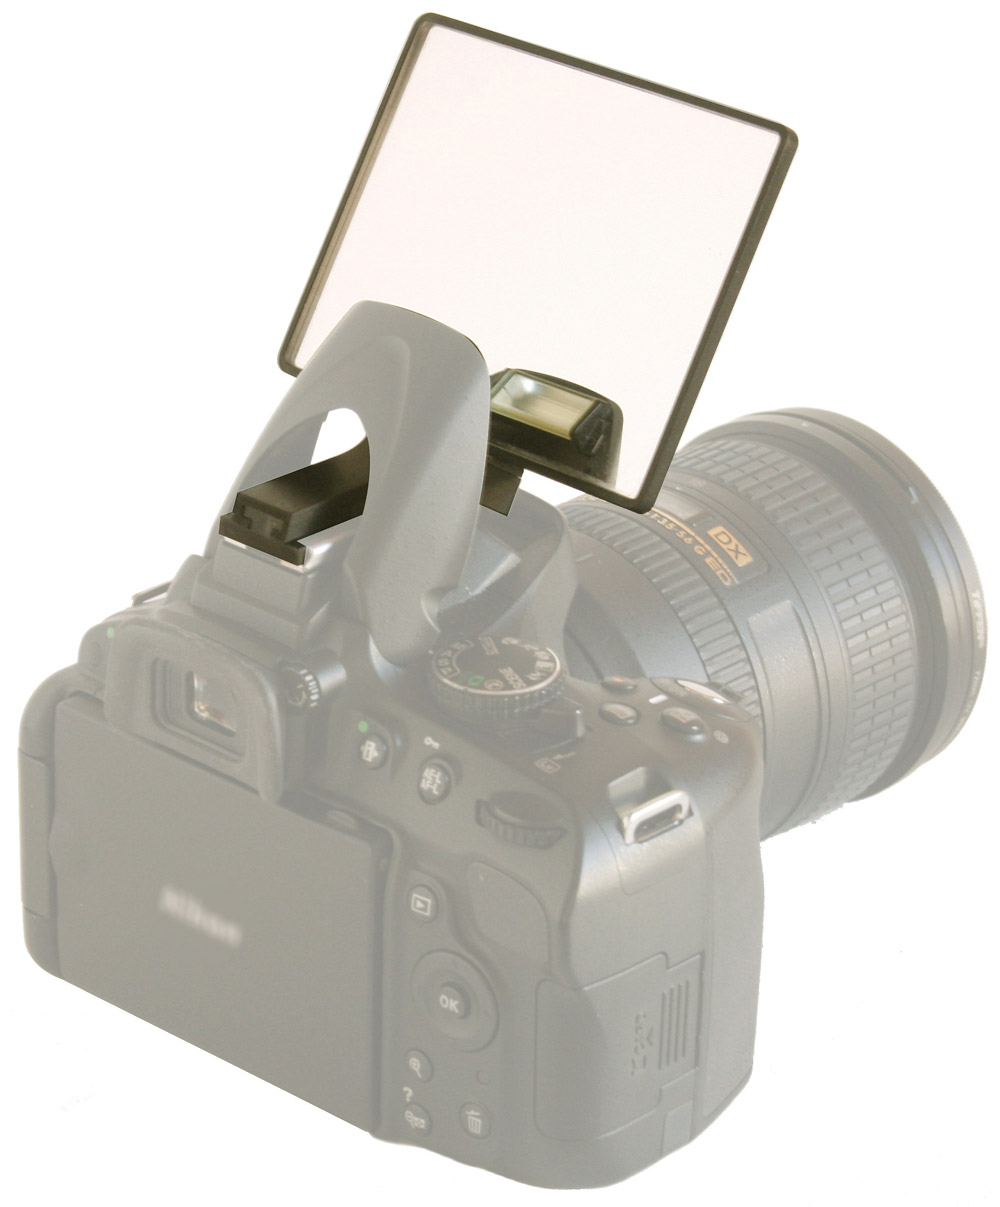 Lightscoop Deluxe Mounted On DSLR